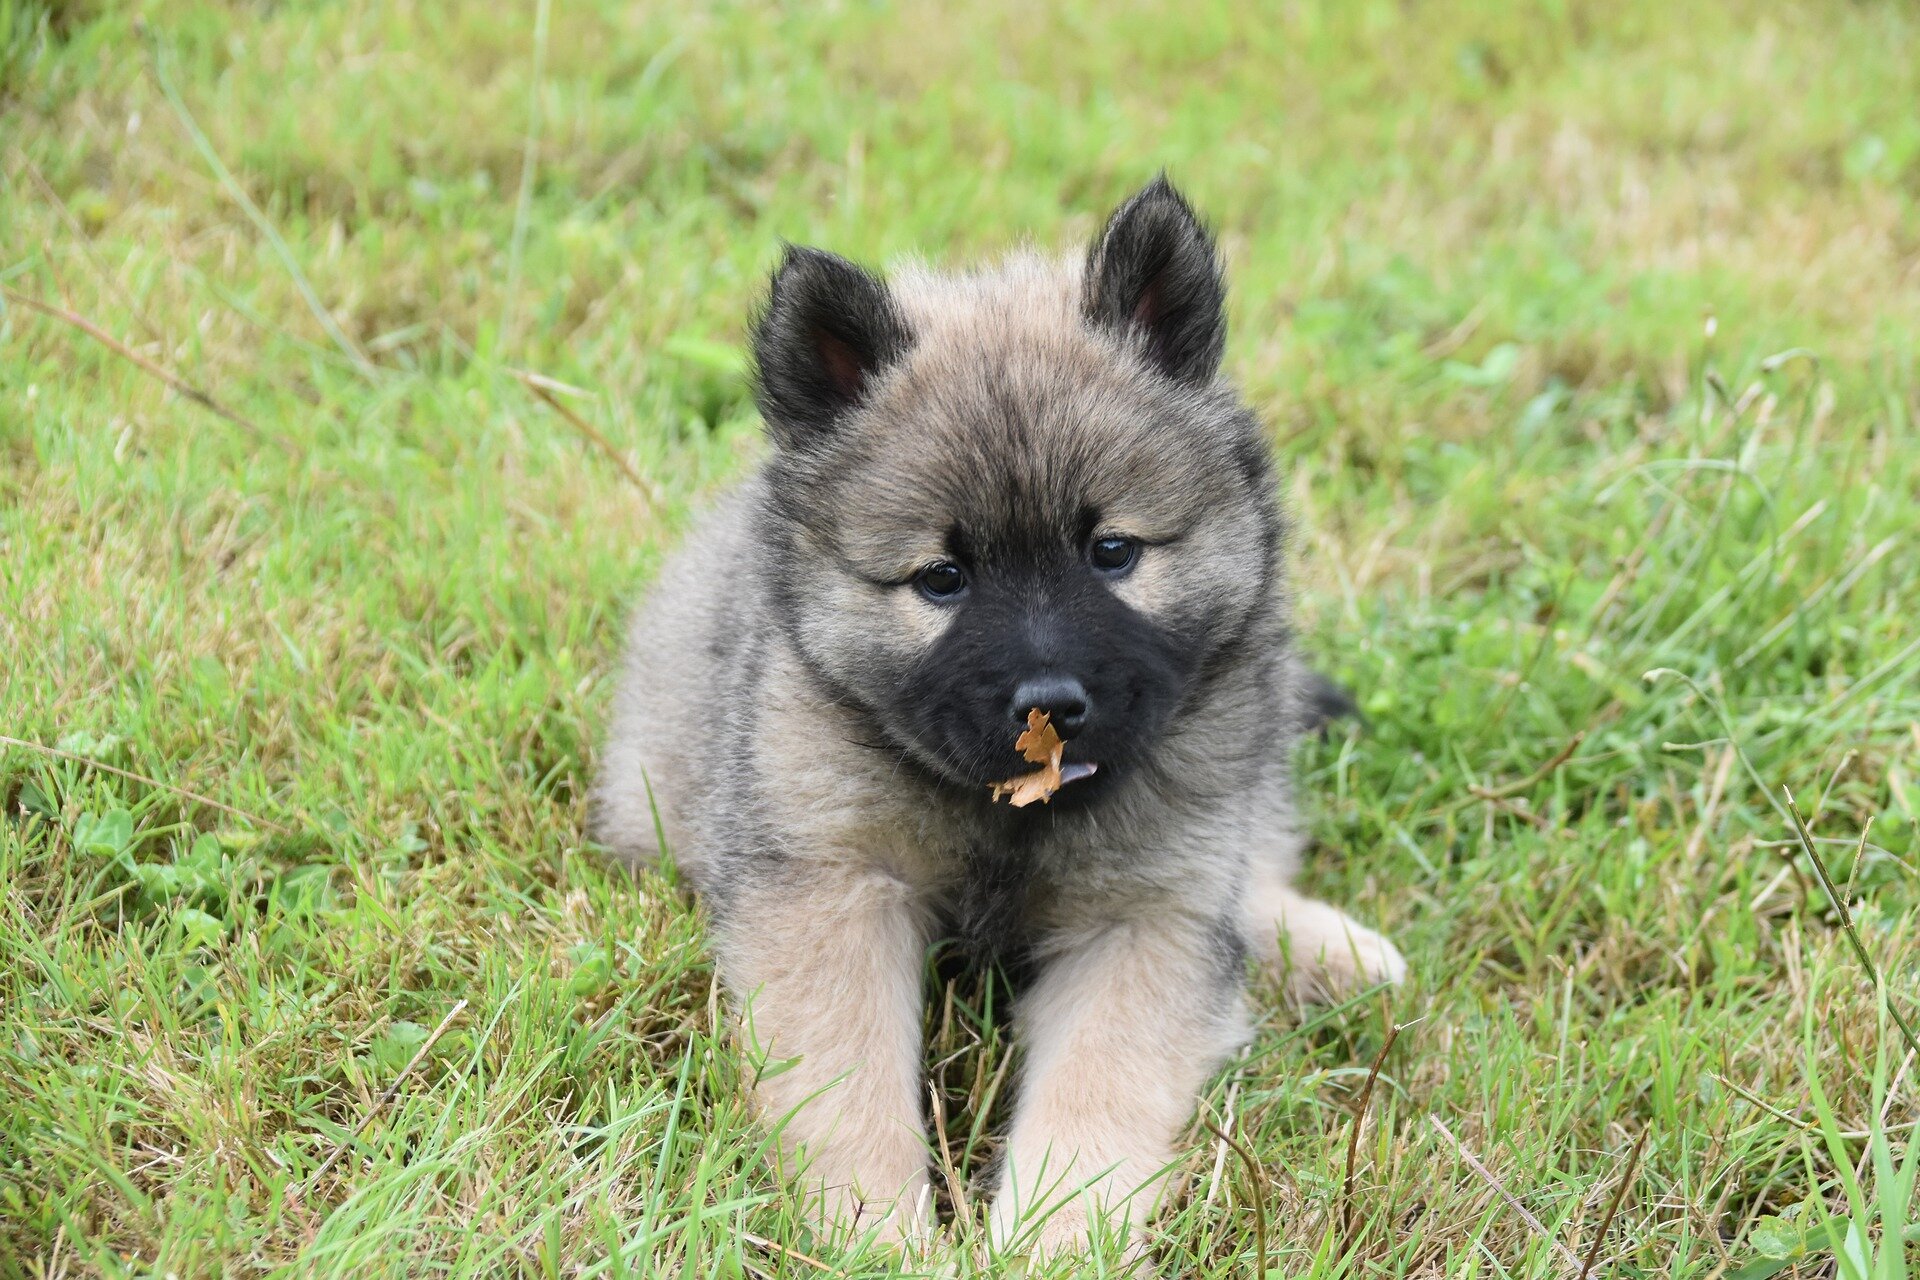 puppy eating grass sitting on the grass